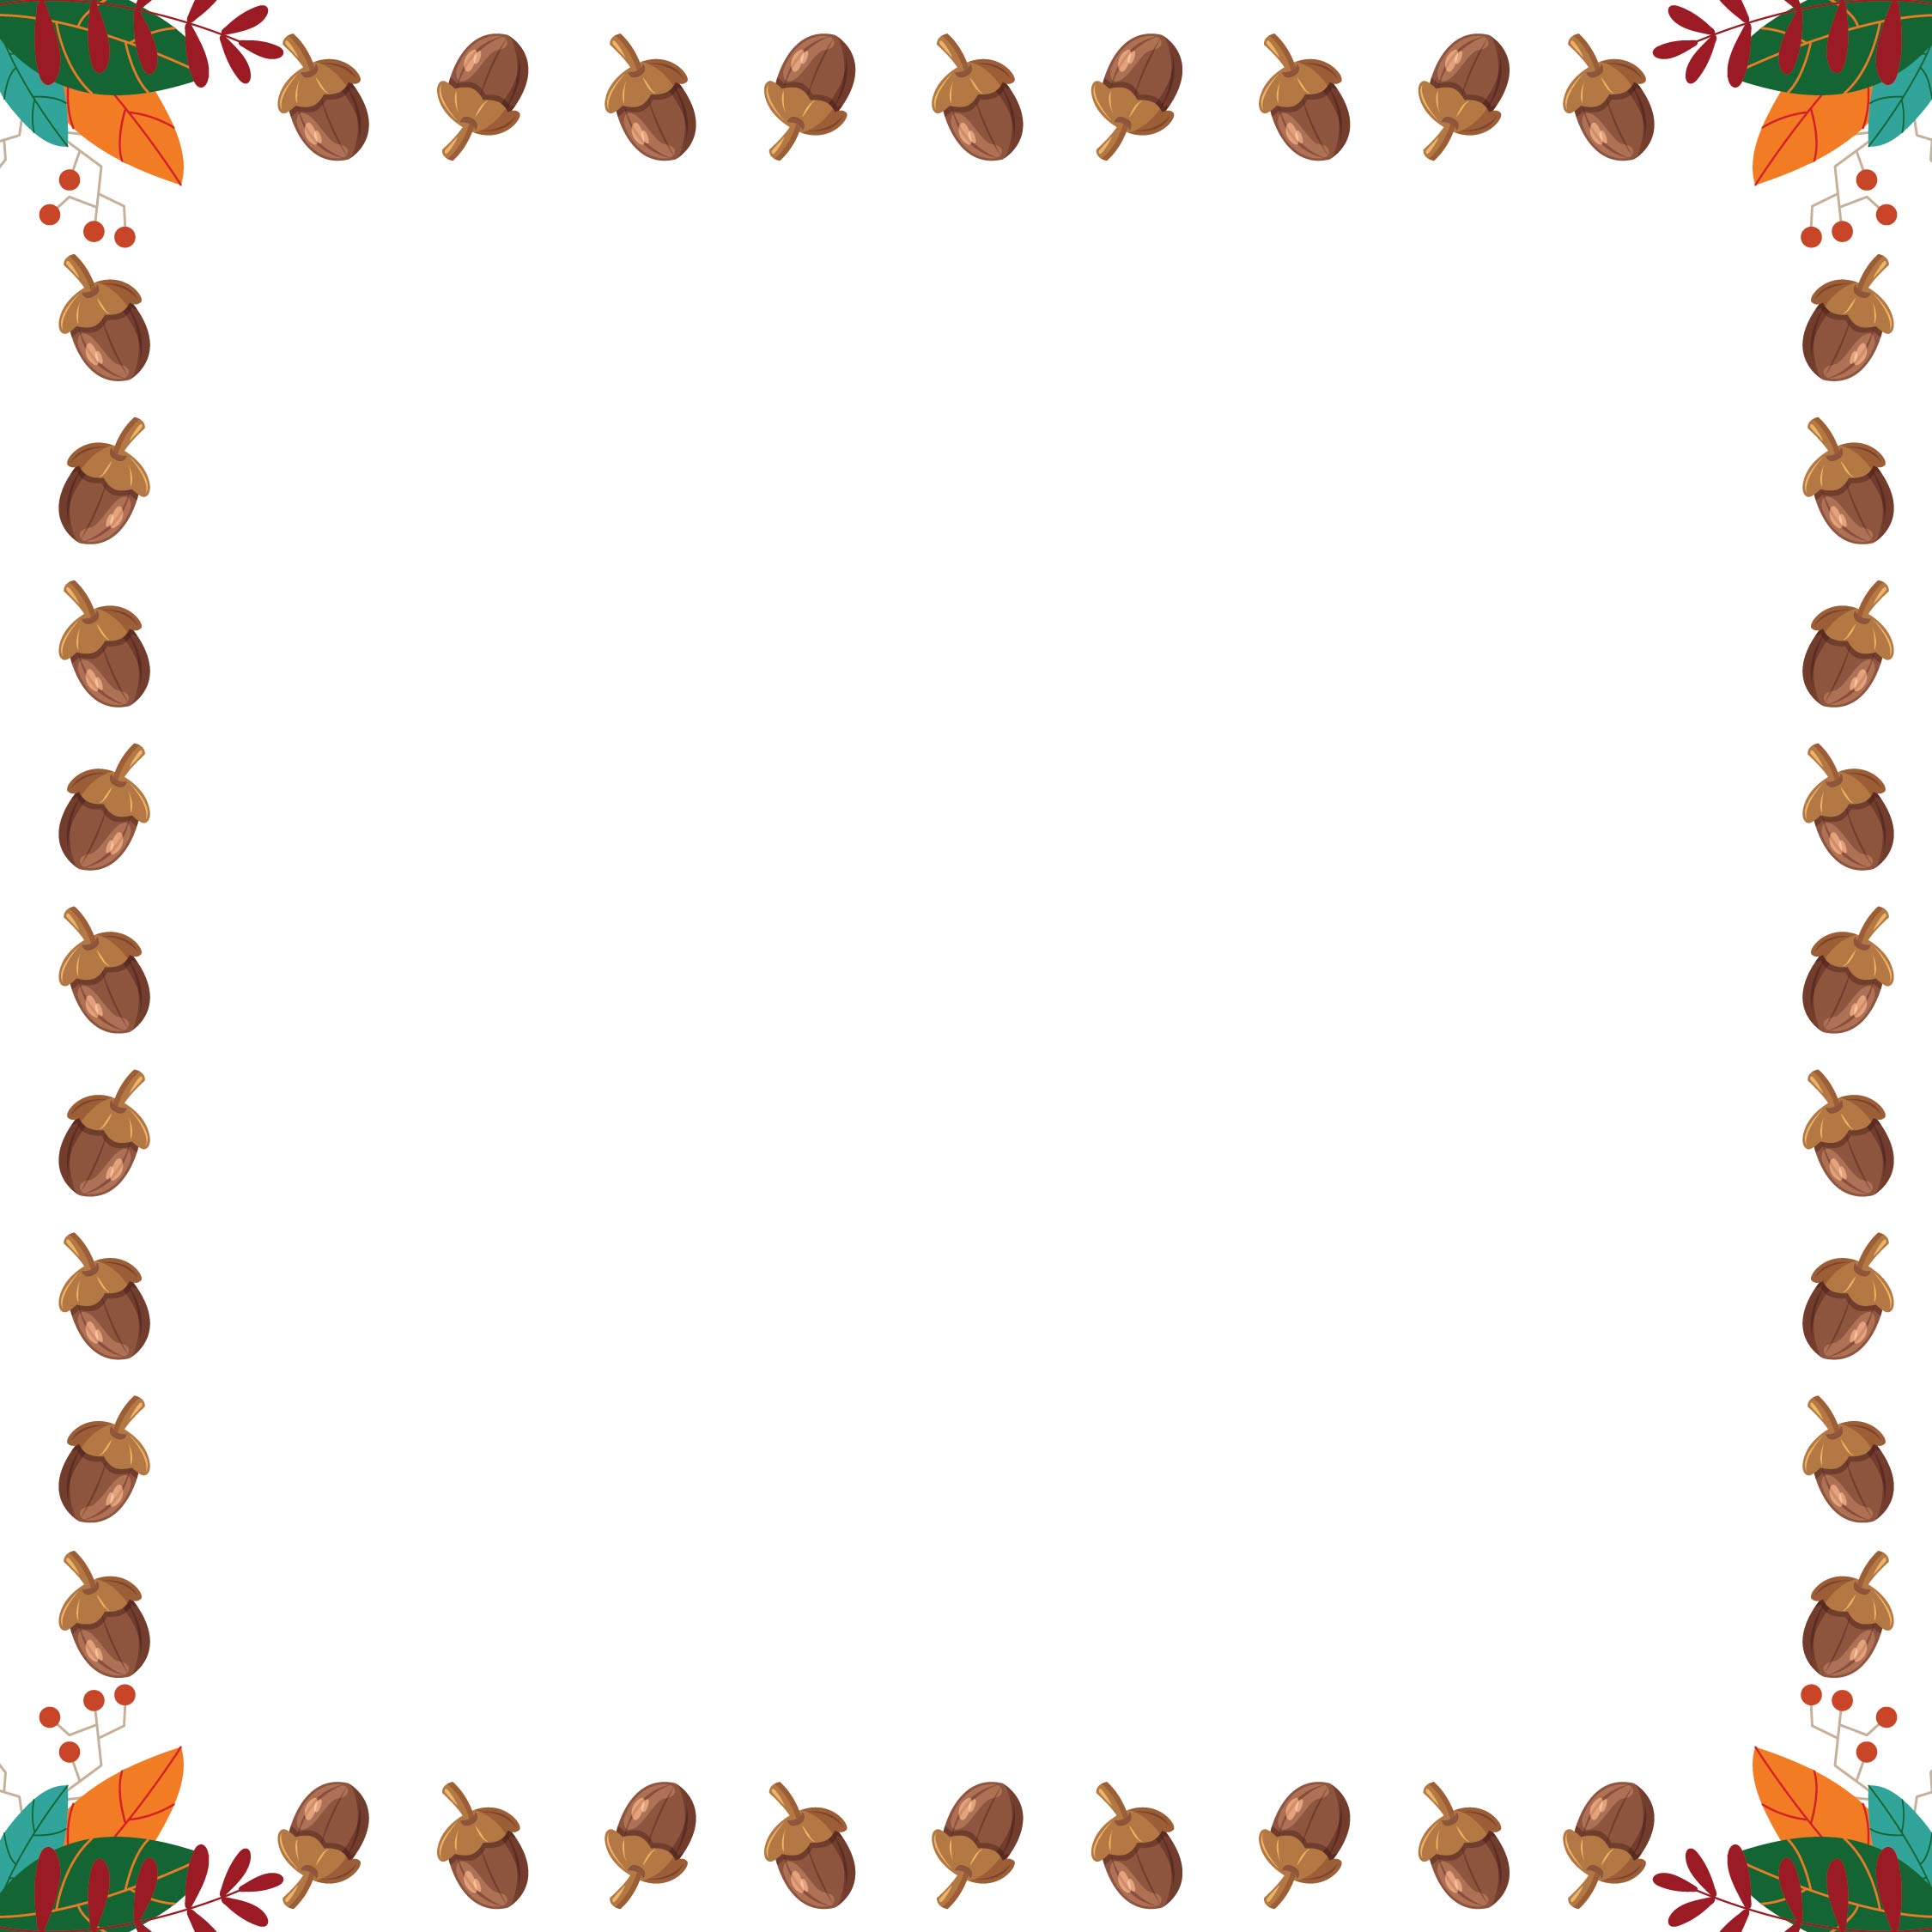 thanksgiving page borders free